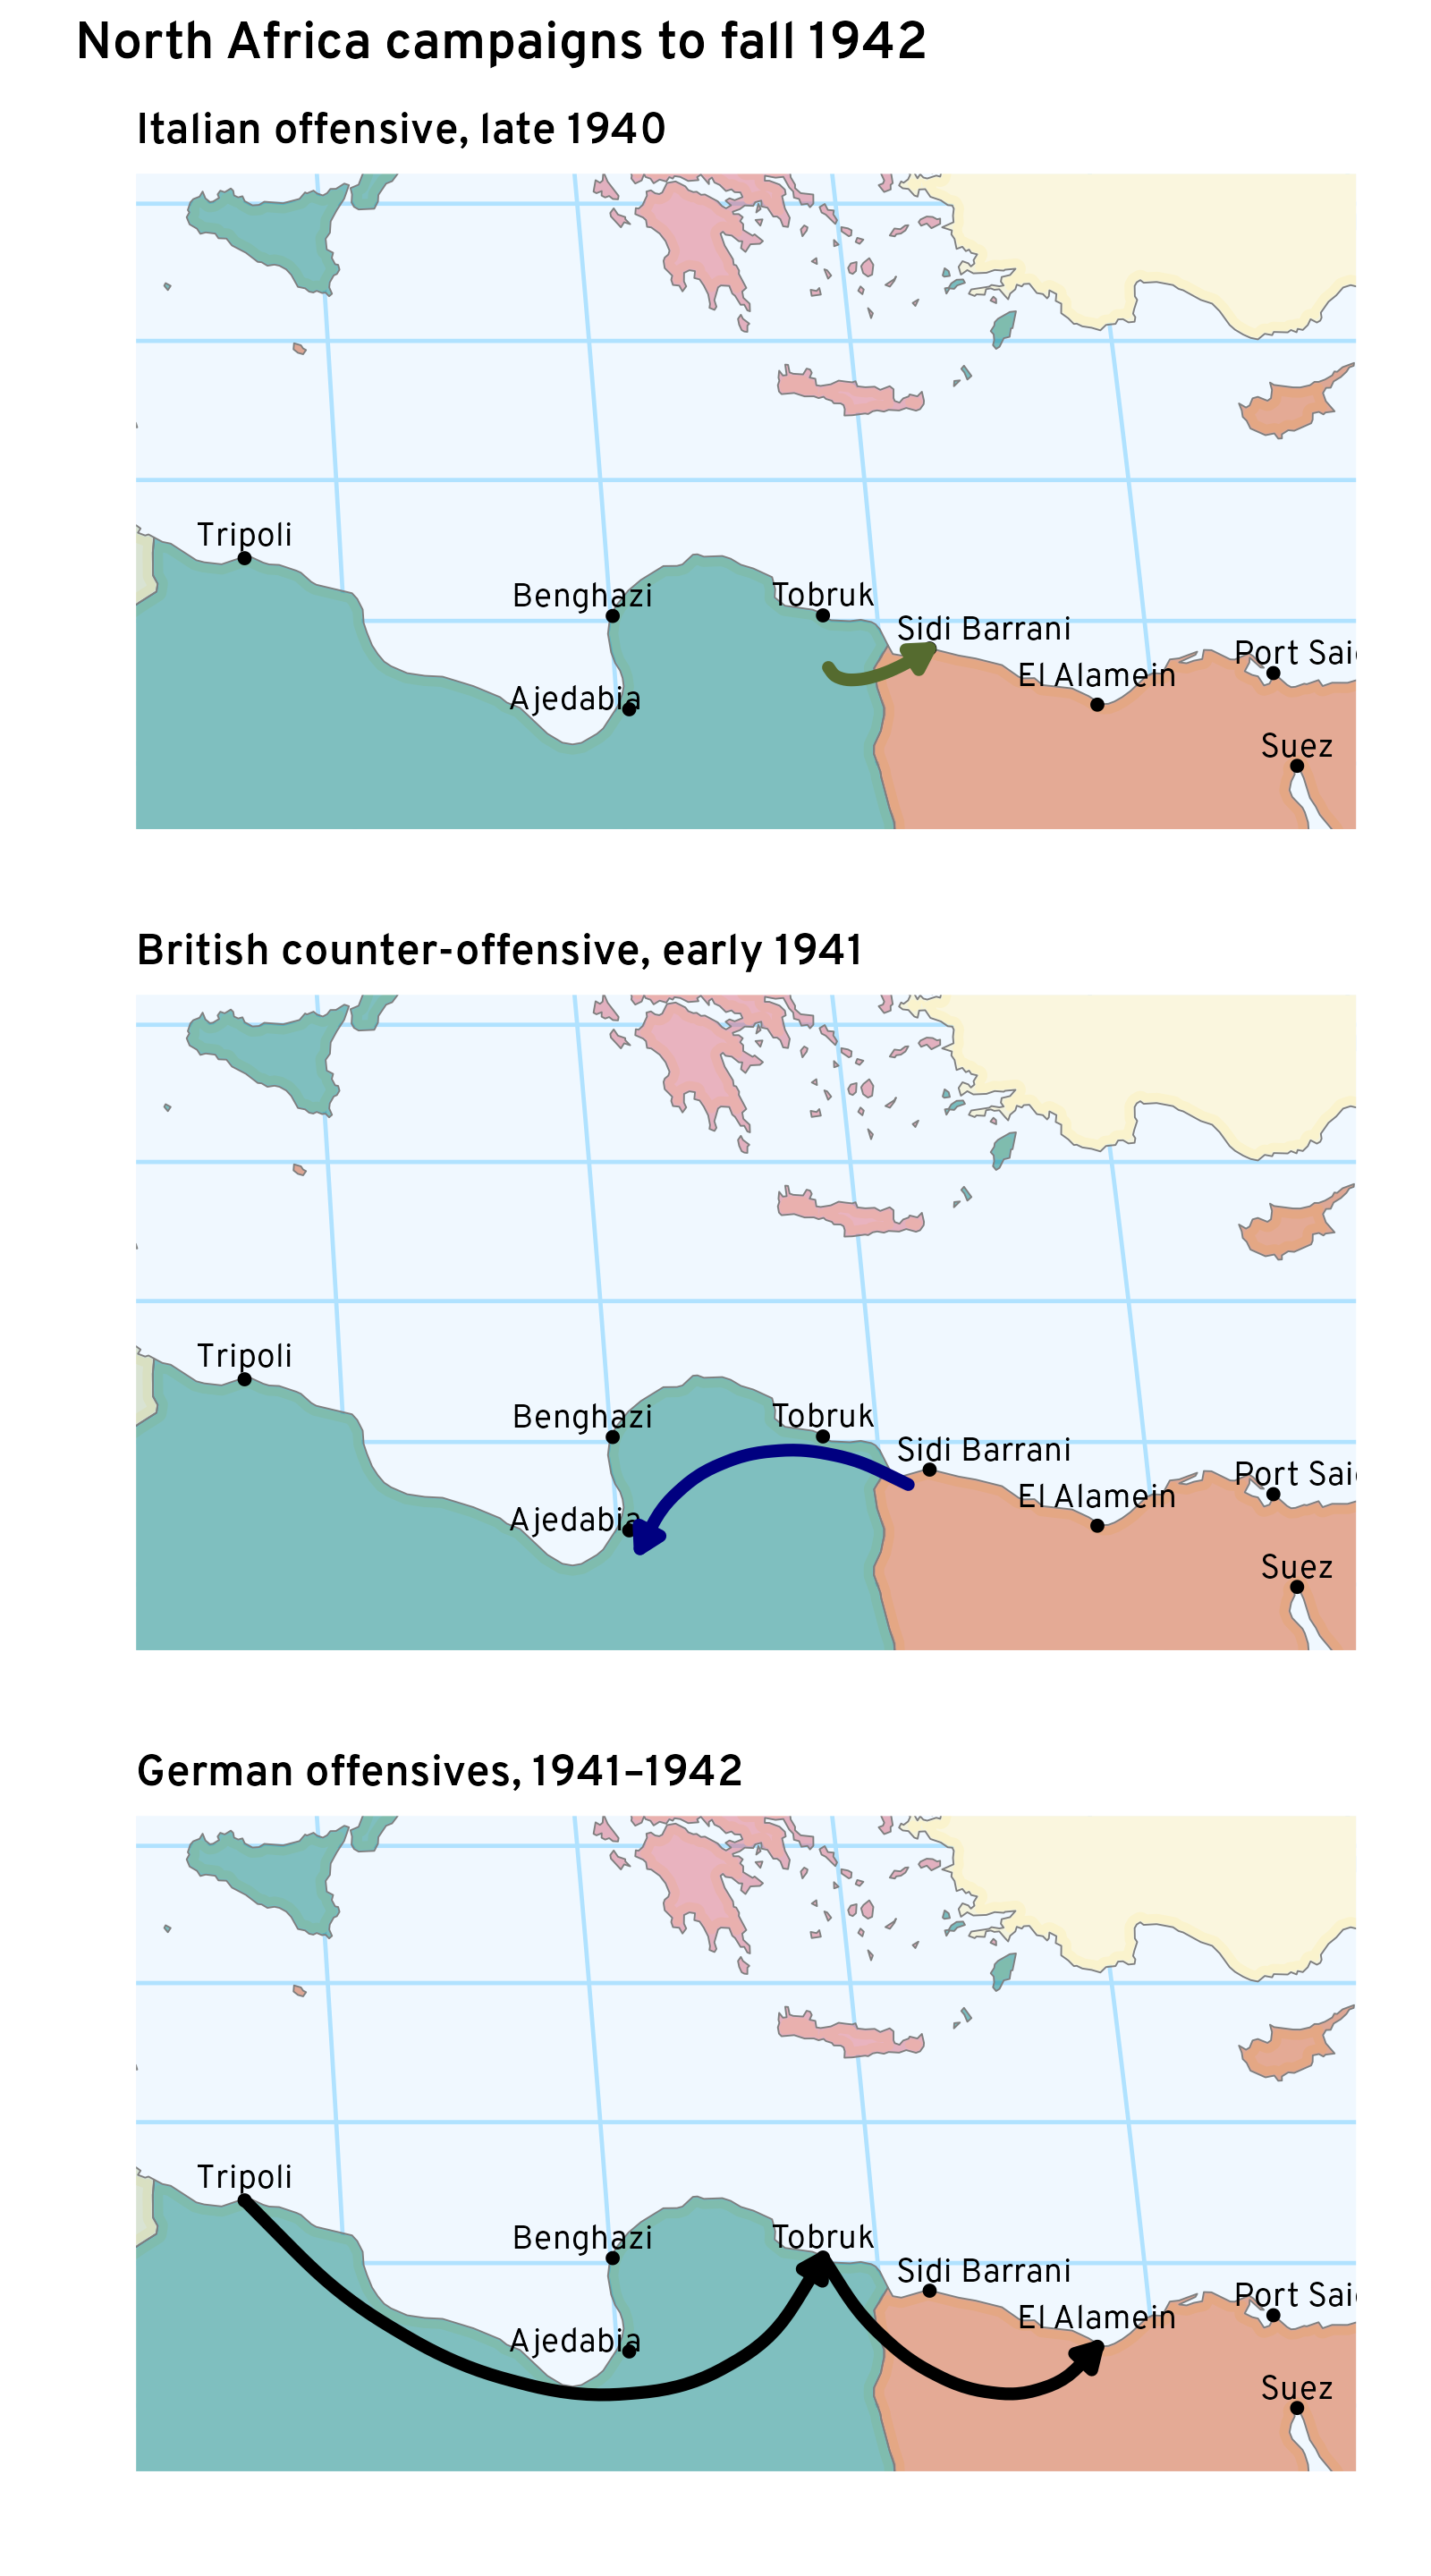 Series of maps showing Italian, British, and German advances over the early years of the North Africa campaign.